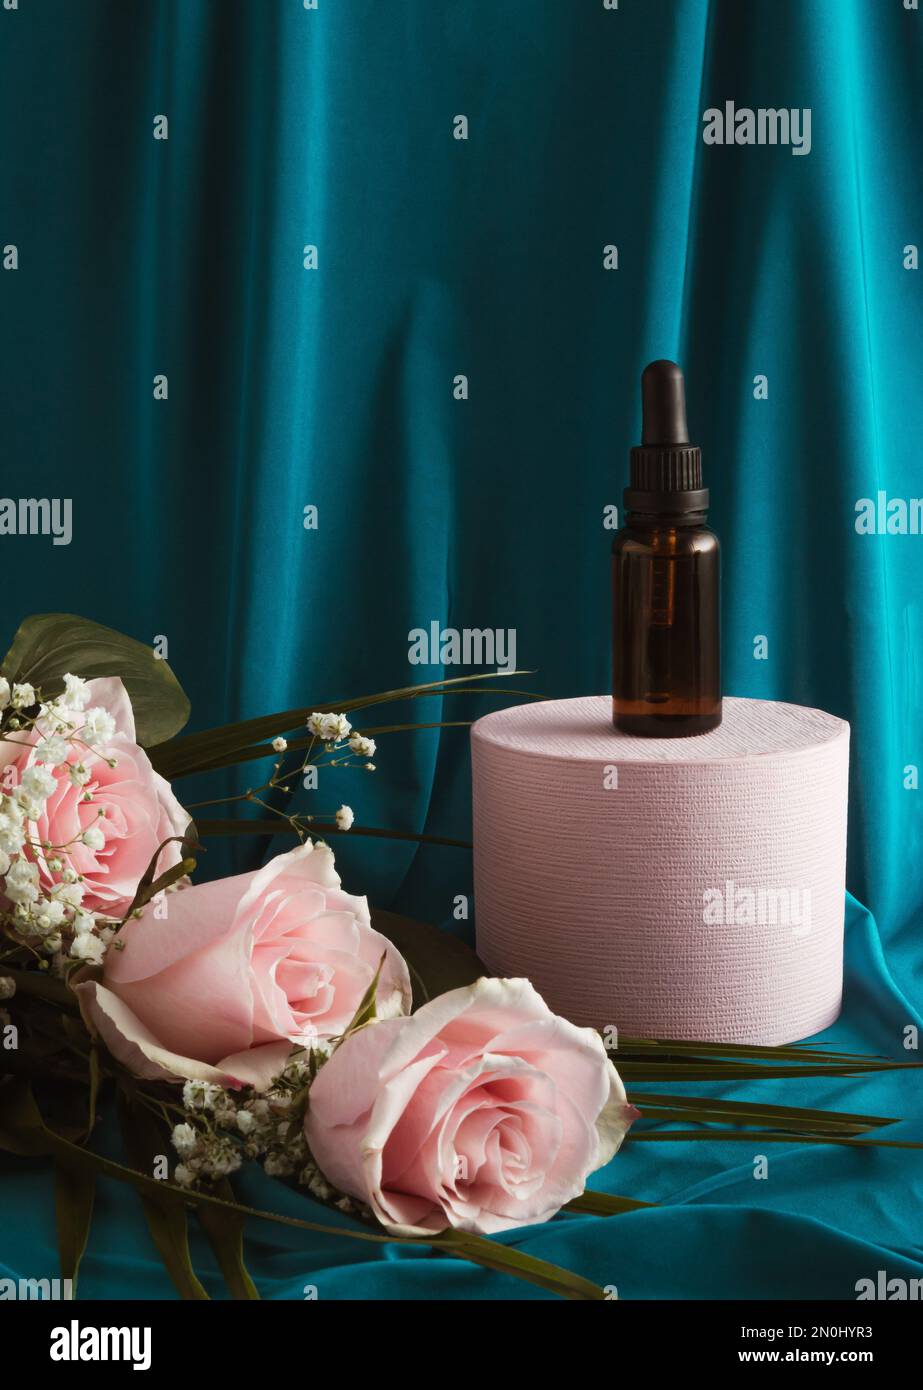 Amber glass dropper bottle on a podium with pink rose flowers. Blue silk curtain background. Skincare products, natural cosmetic. Beauty concept. Vale Stock Photo